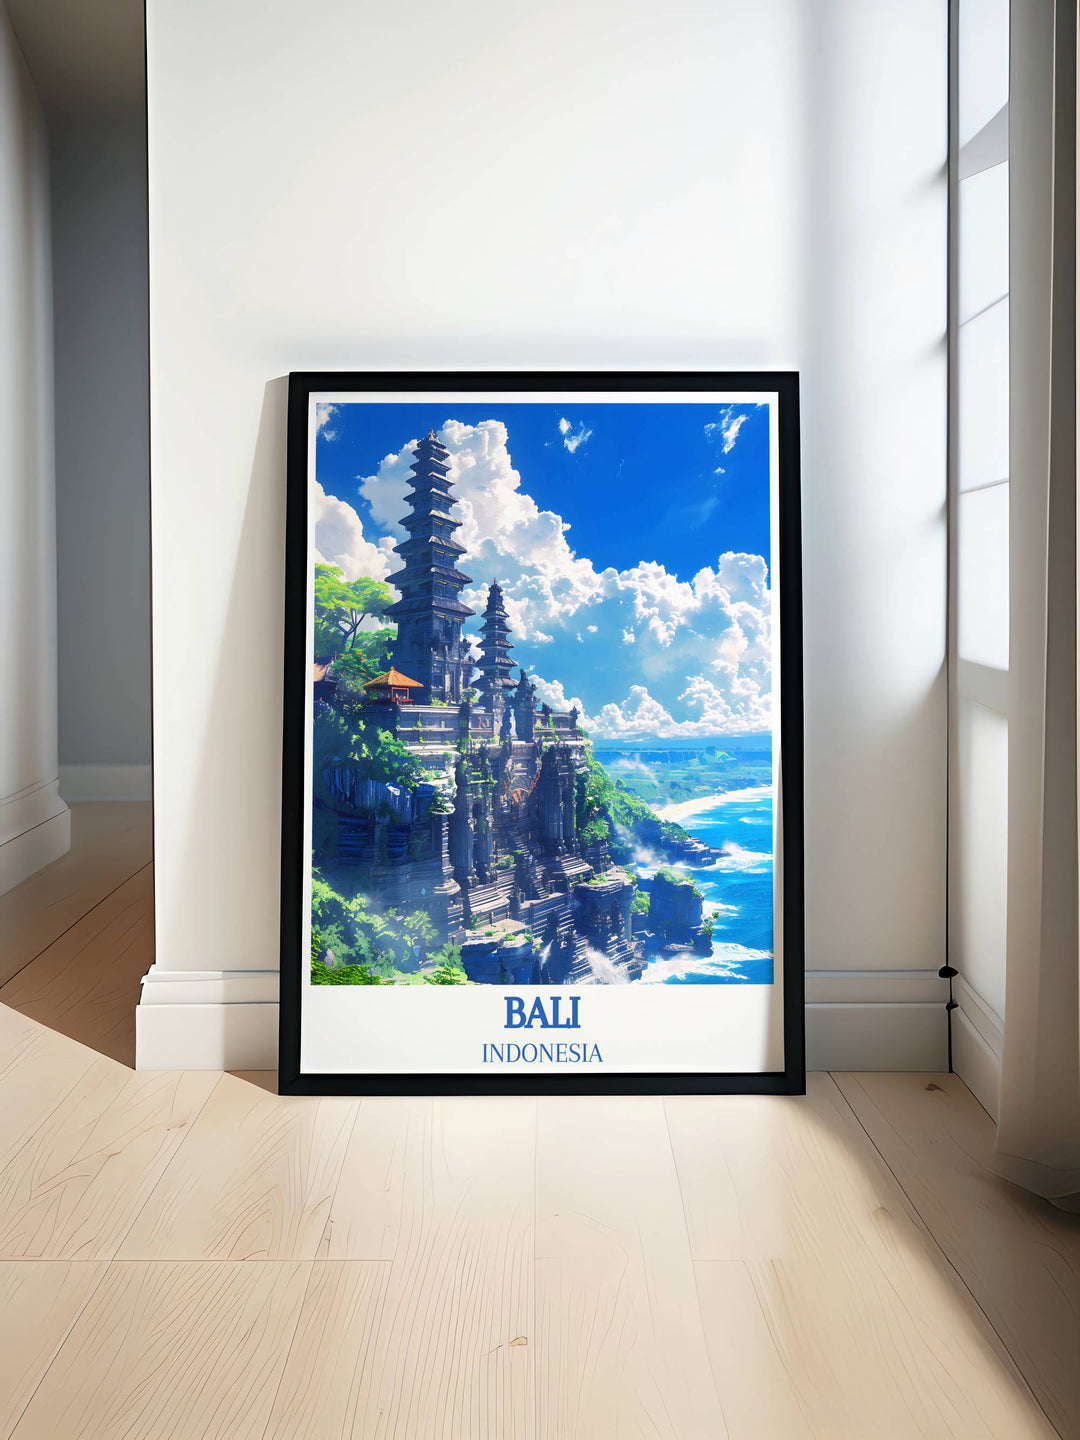 Bali gift featuring Tanah Lot Temple, suitable for birthdays, anniversaries, or as a special gift for art lovers.